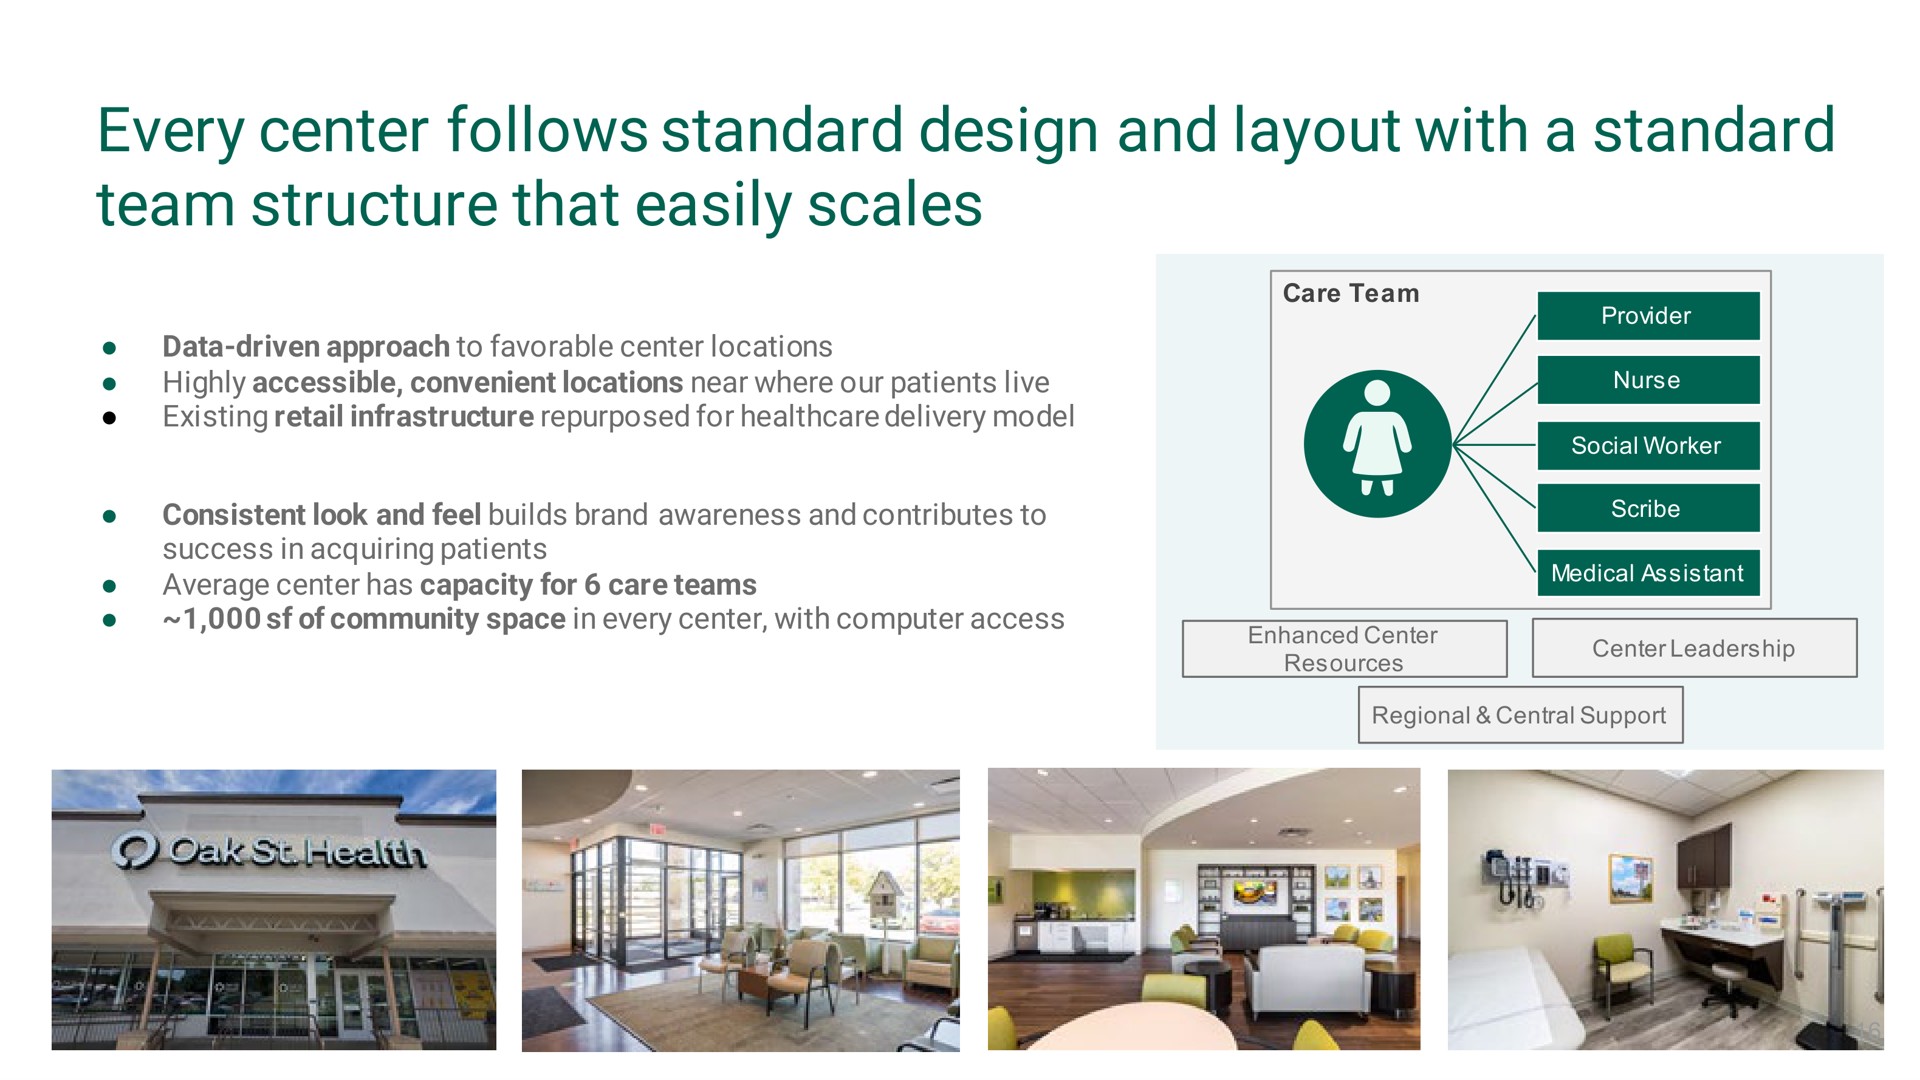 every center follows standard design and layout with a standard team structure that easily scales | Oak Street Health